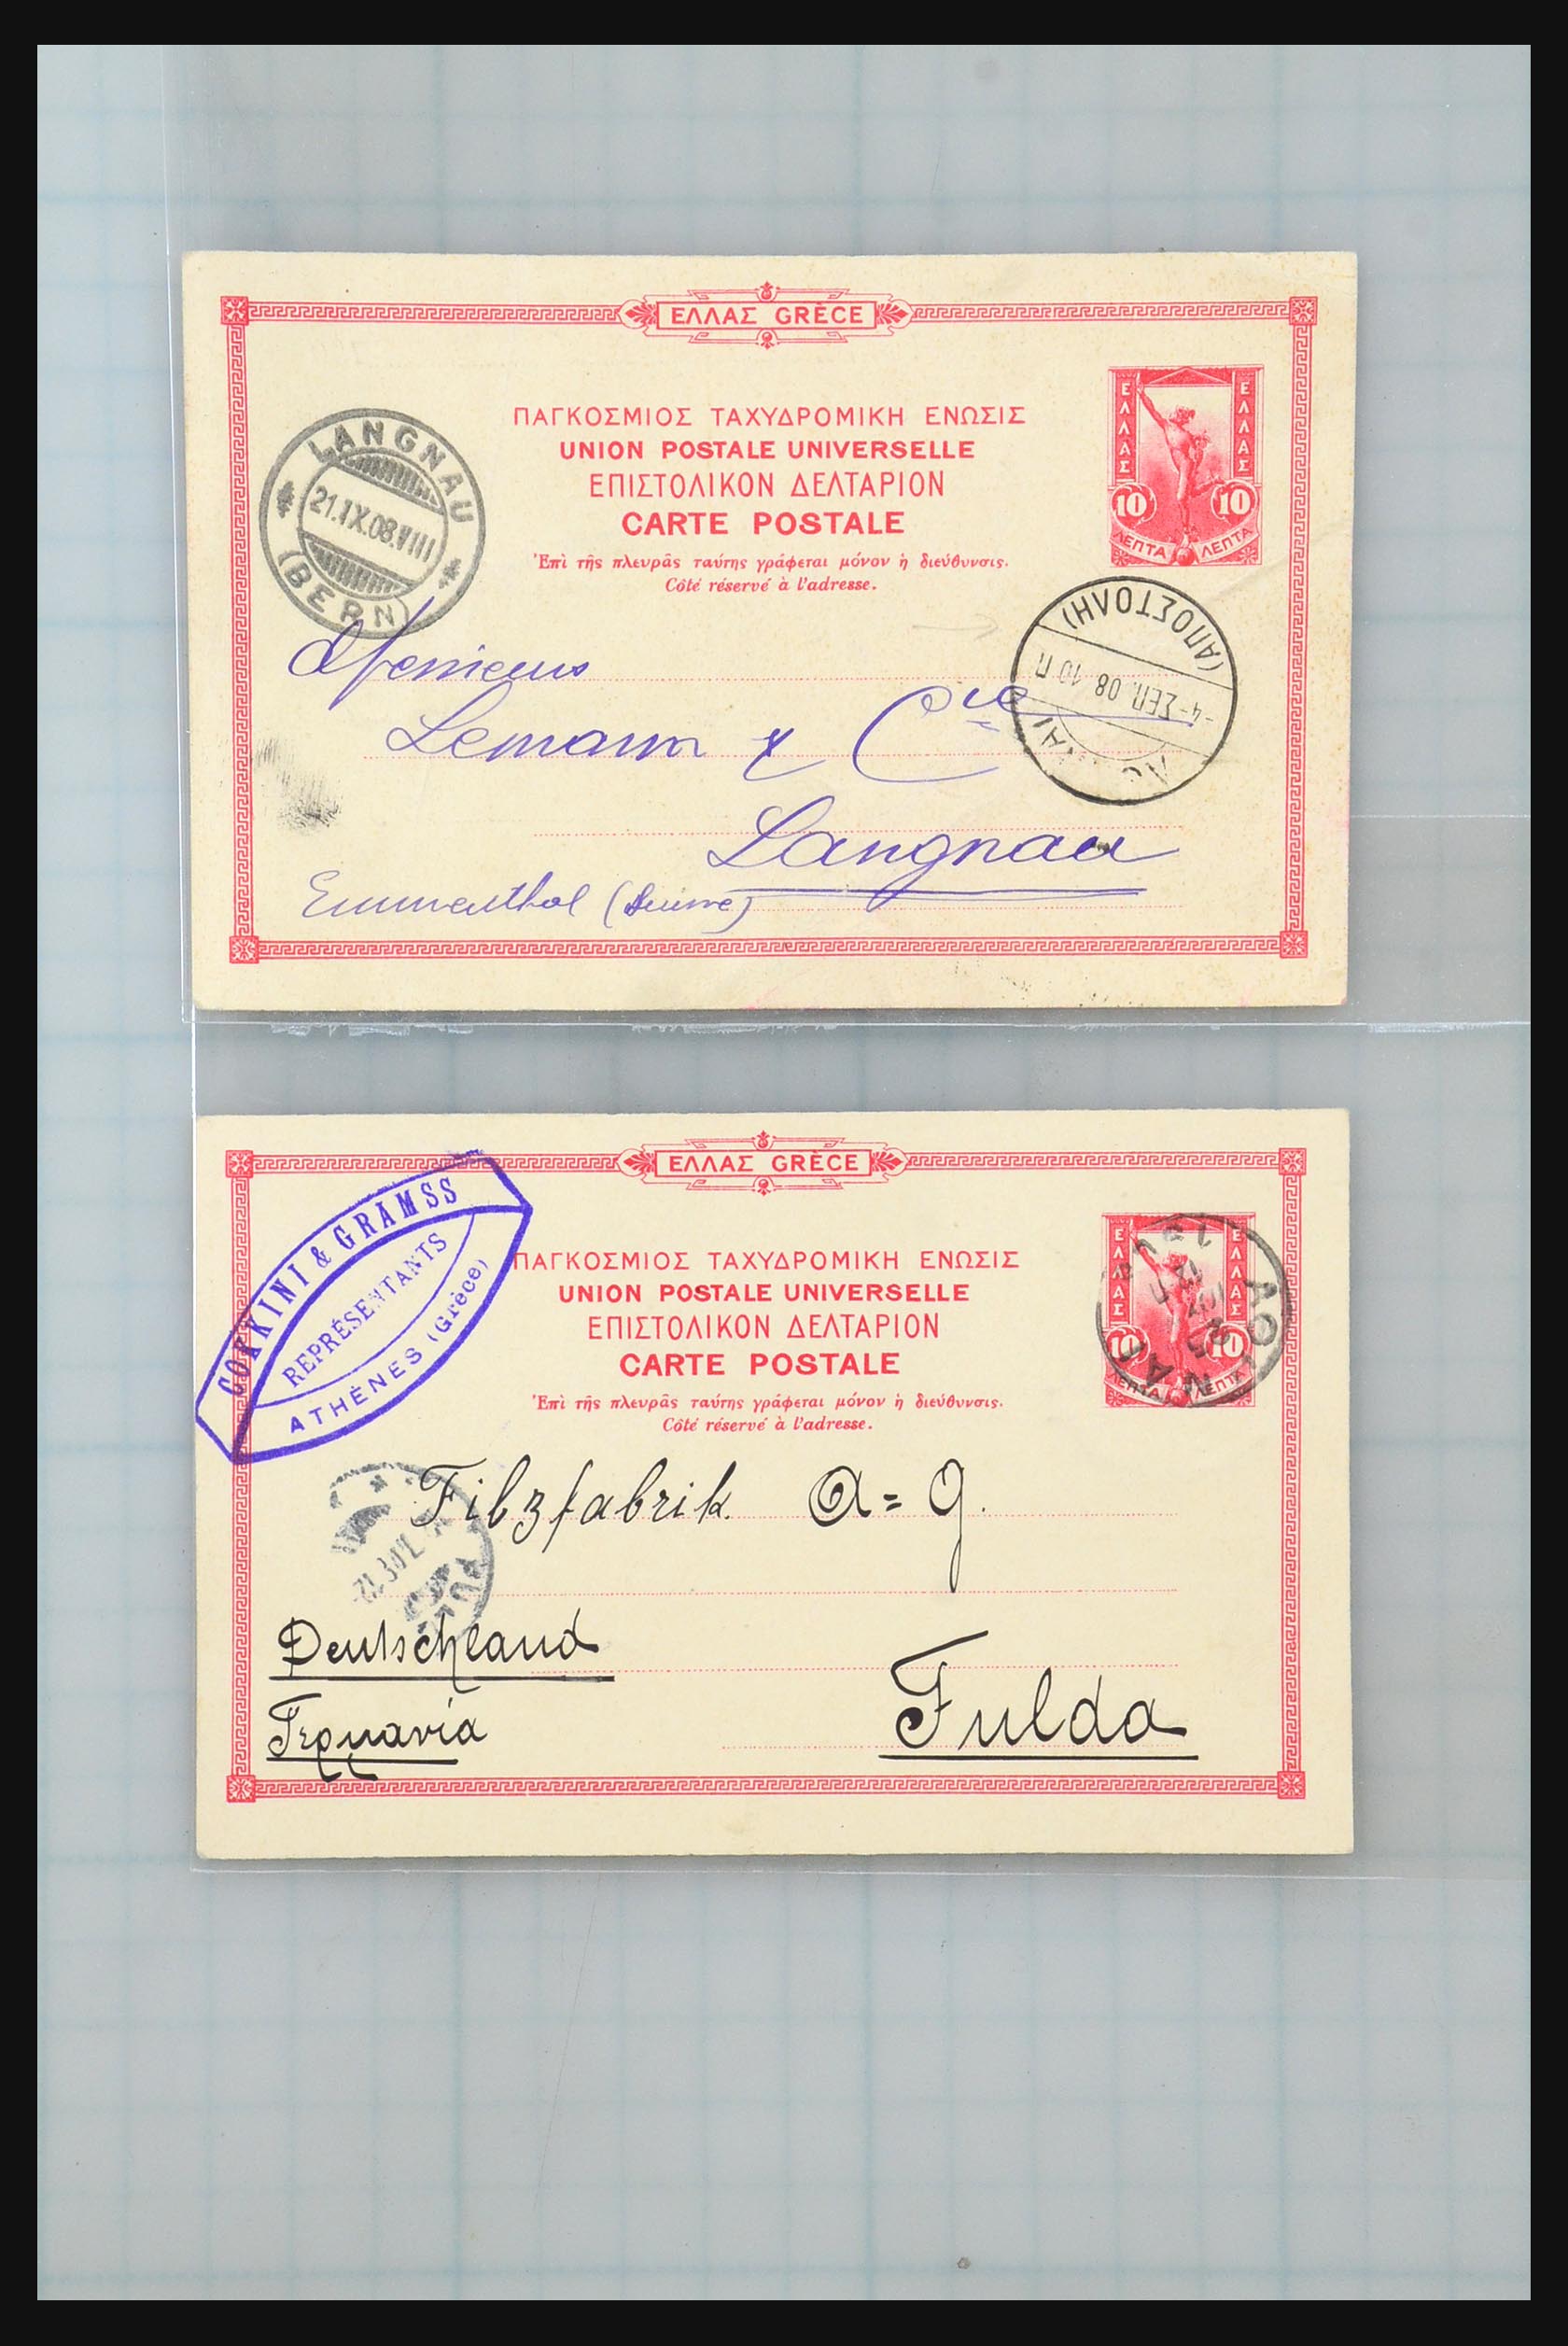 31358 026 - 31358 Portugal/Luxemburg/Greece covers 1880-1960.